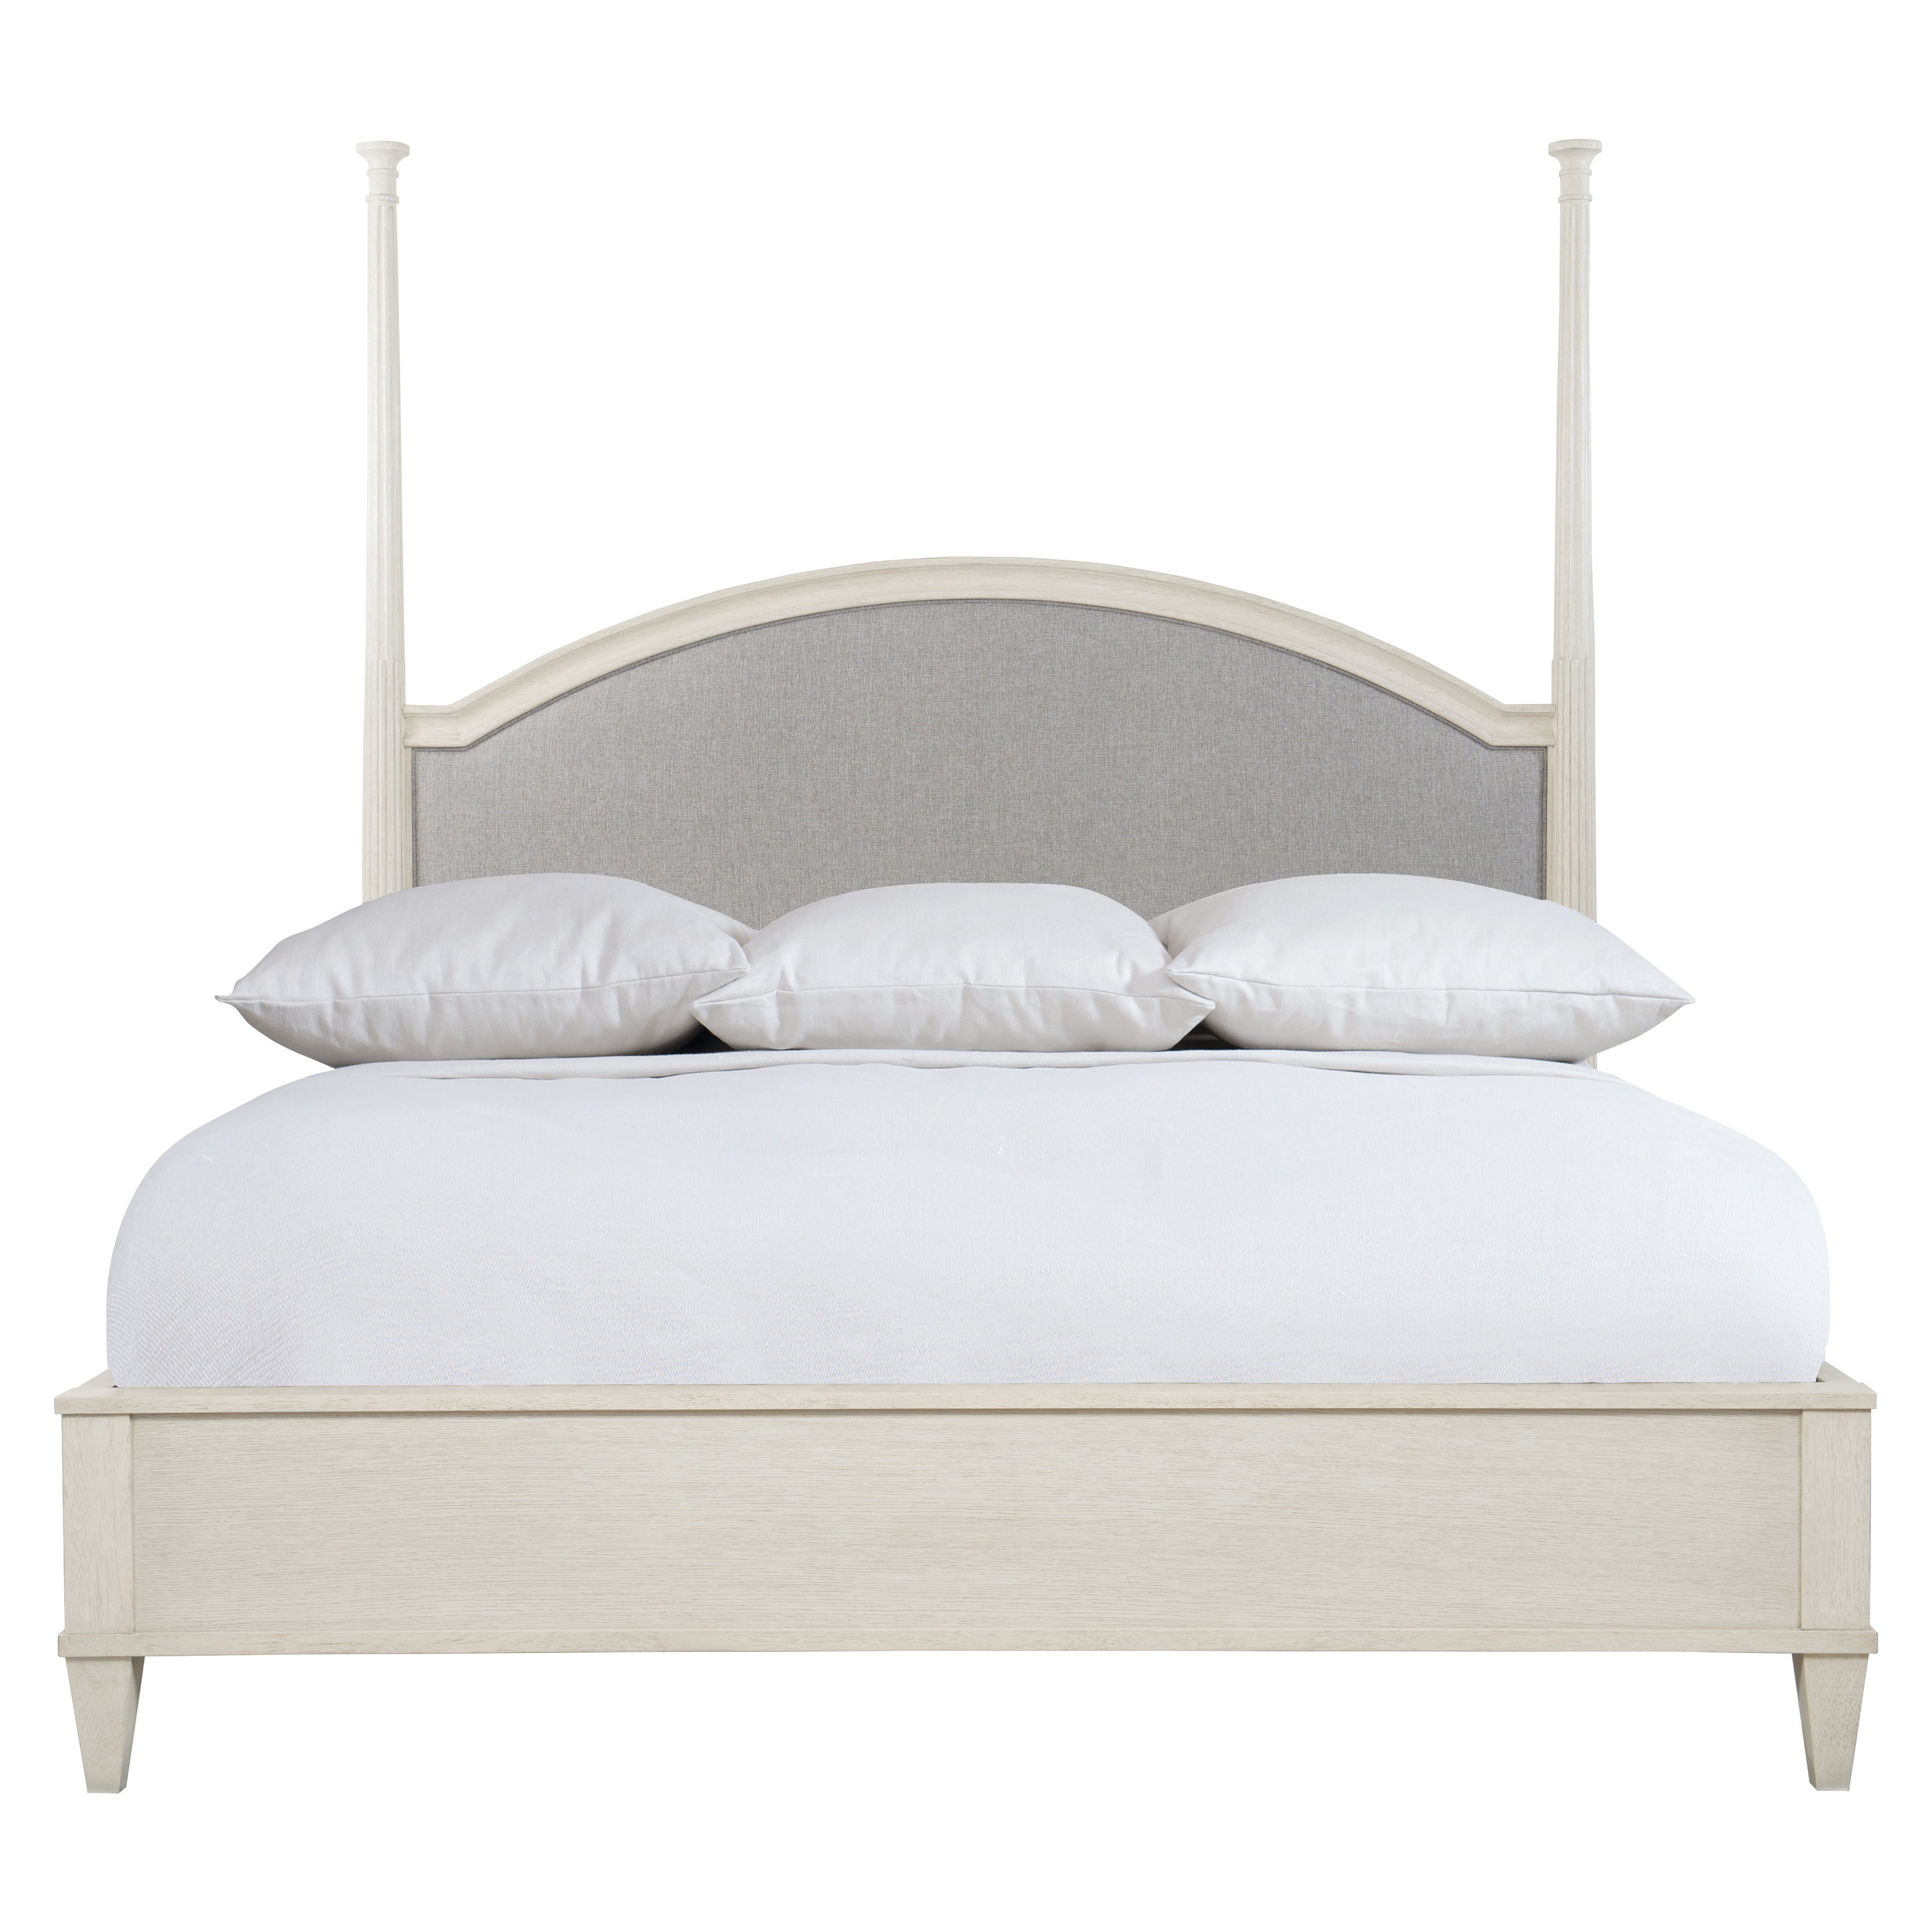 Allure Upholstered Queen Poster Bed